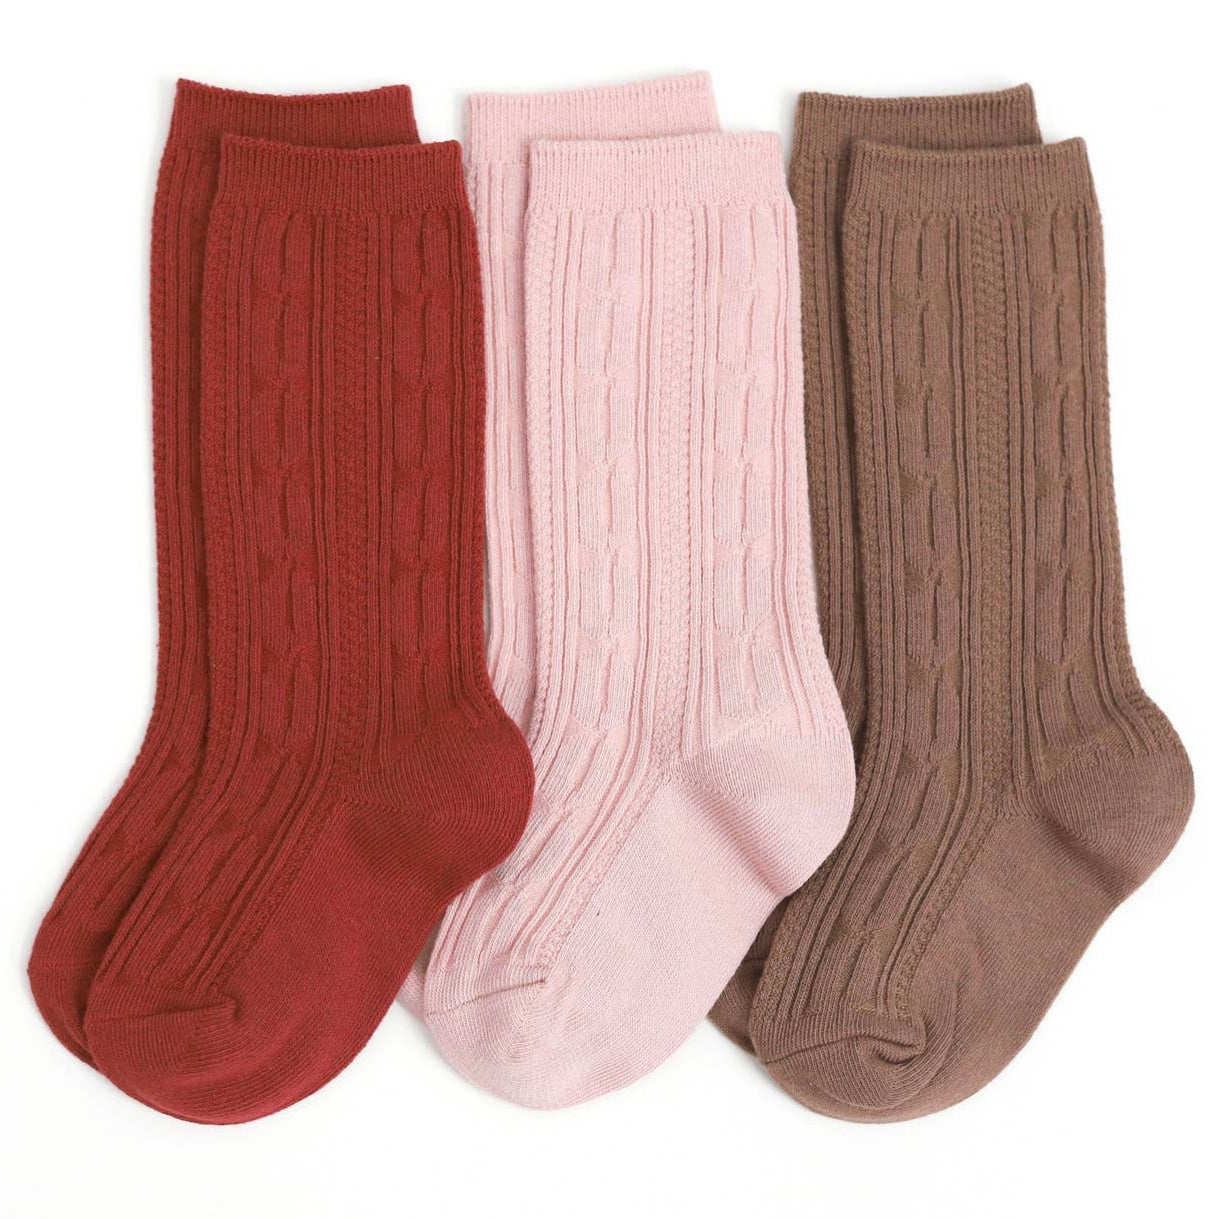 Sequoia Cable Knit Knee High Socks 3-Pack